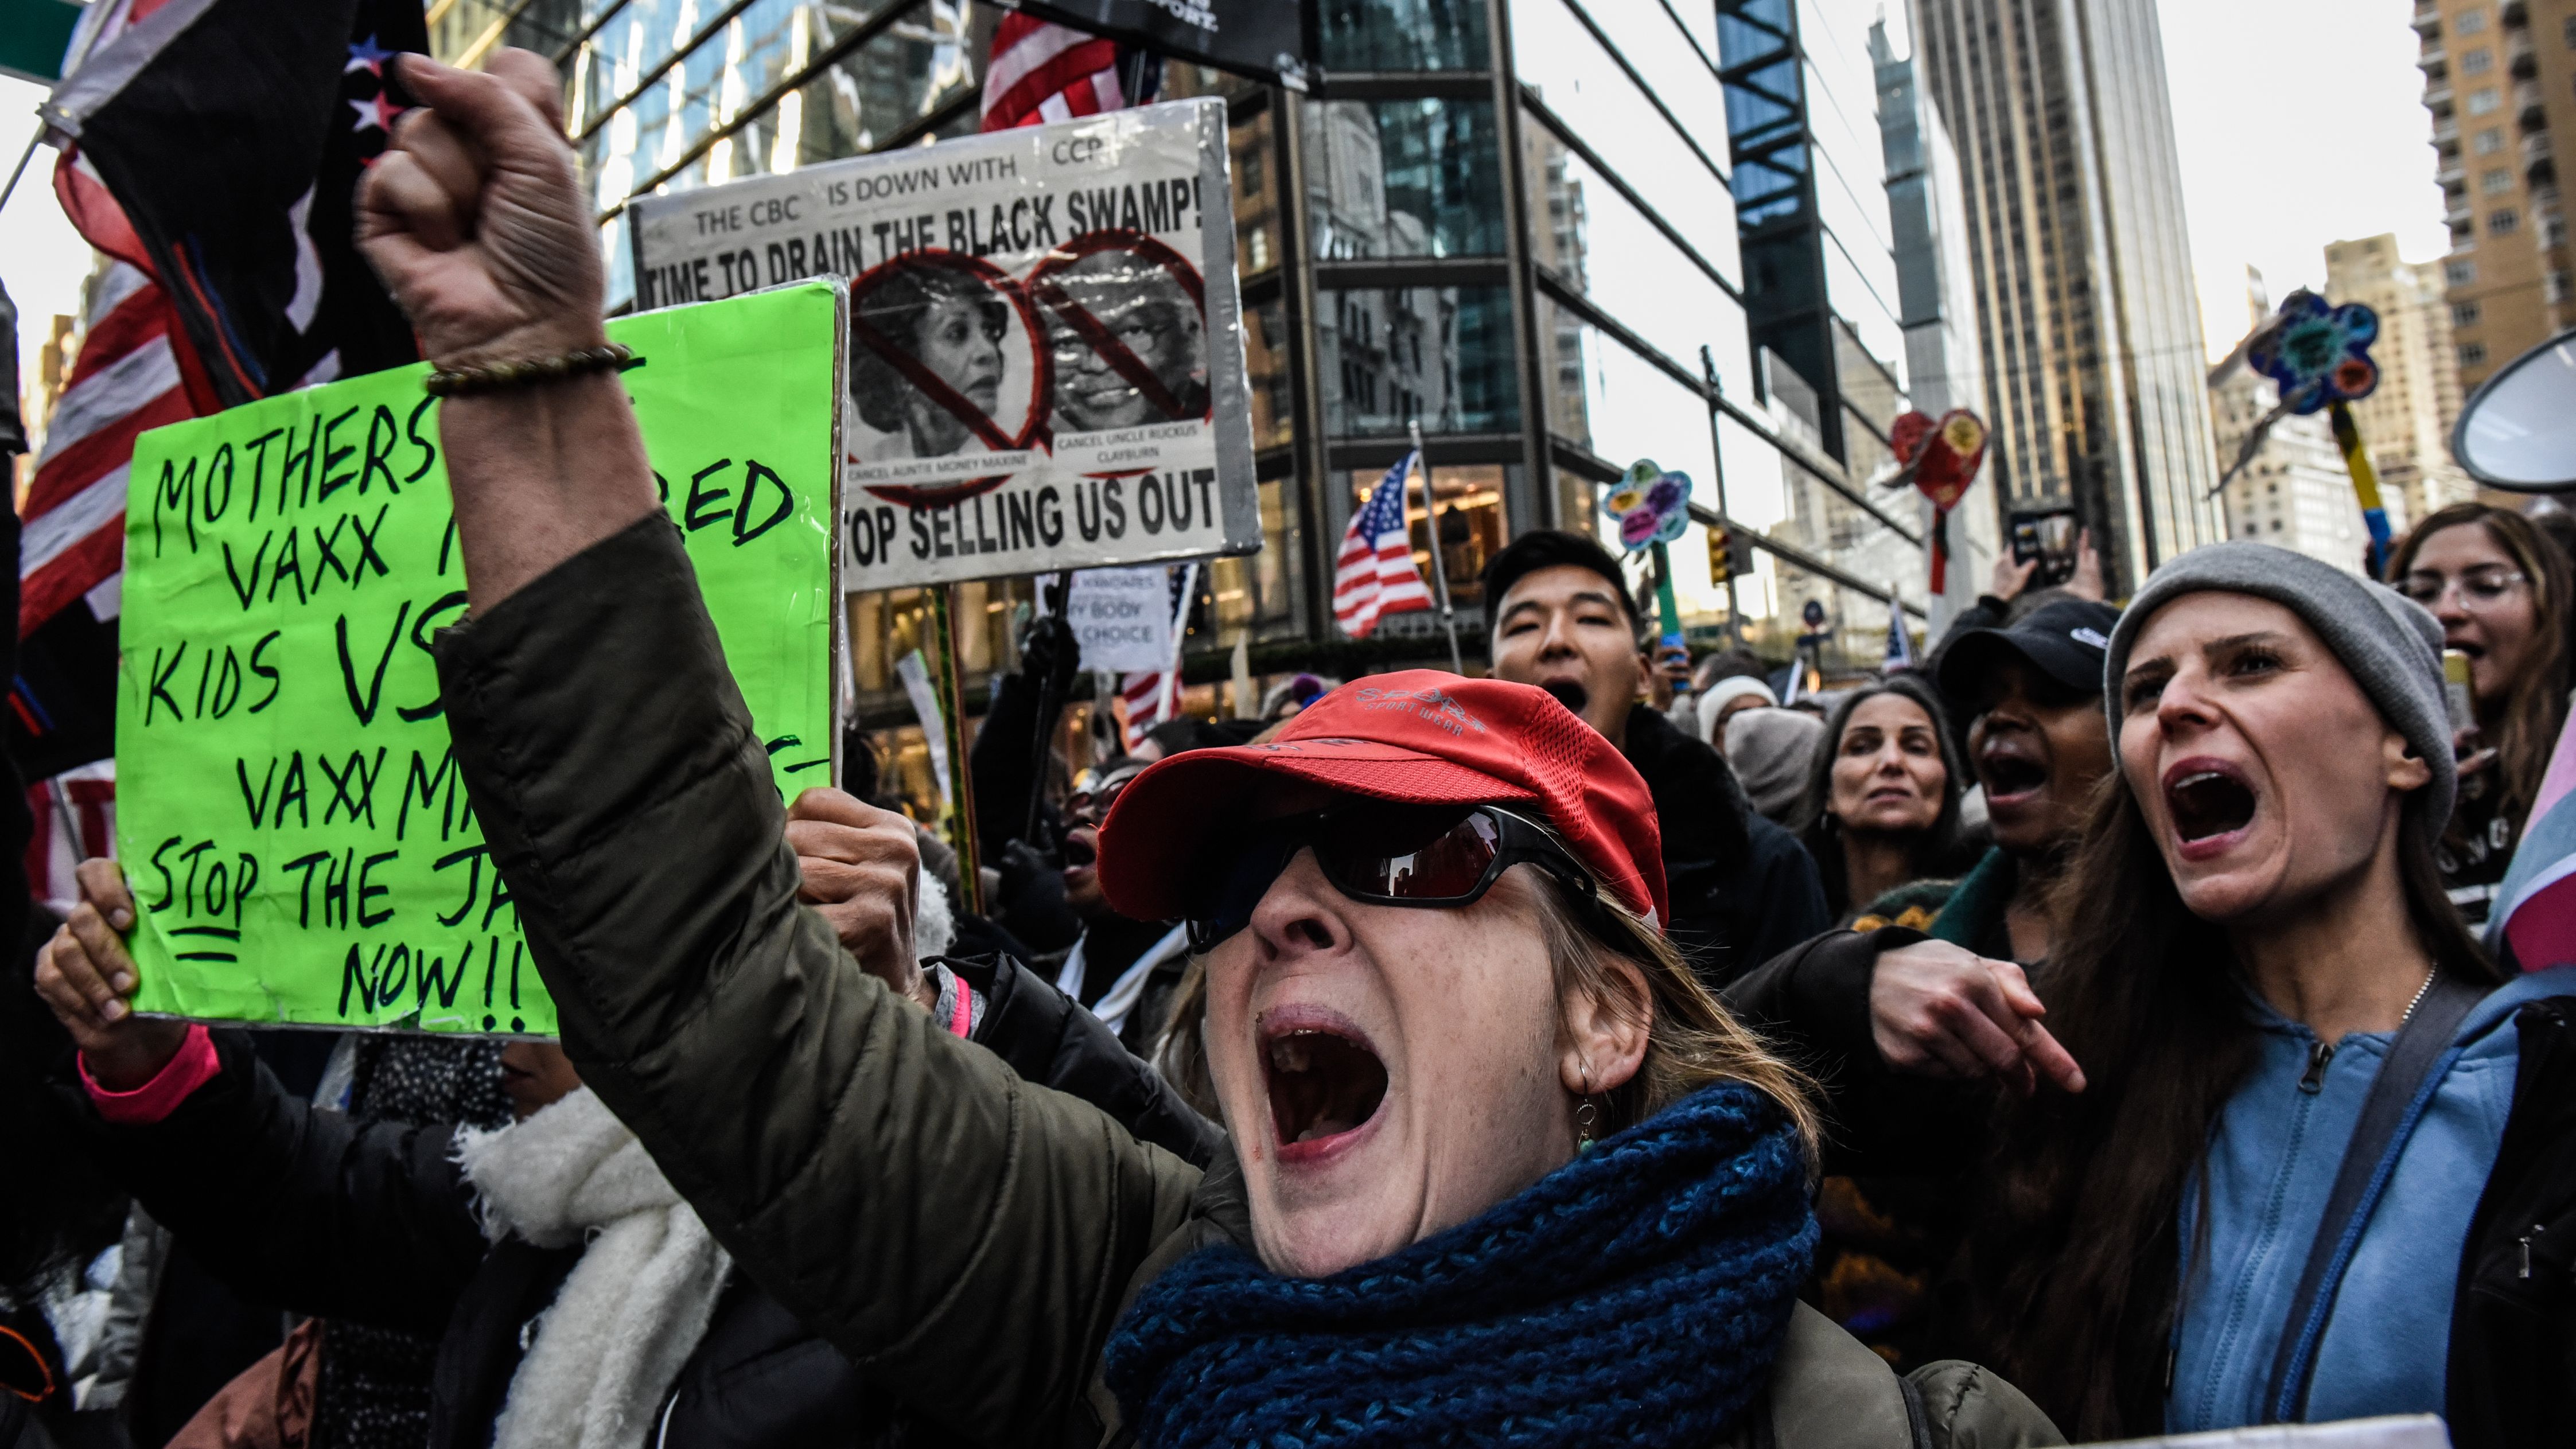 Protesters rally against vaccine mandates on Saturday November 20th, 2021 in New York City.